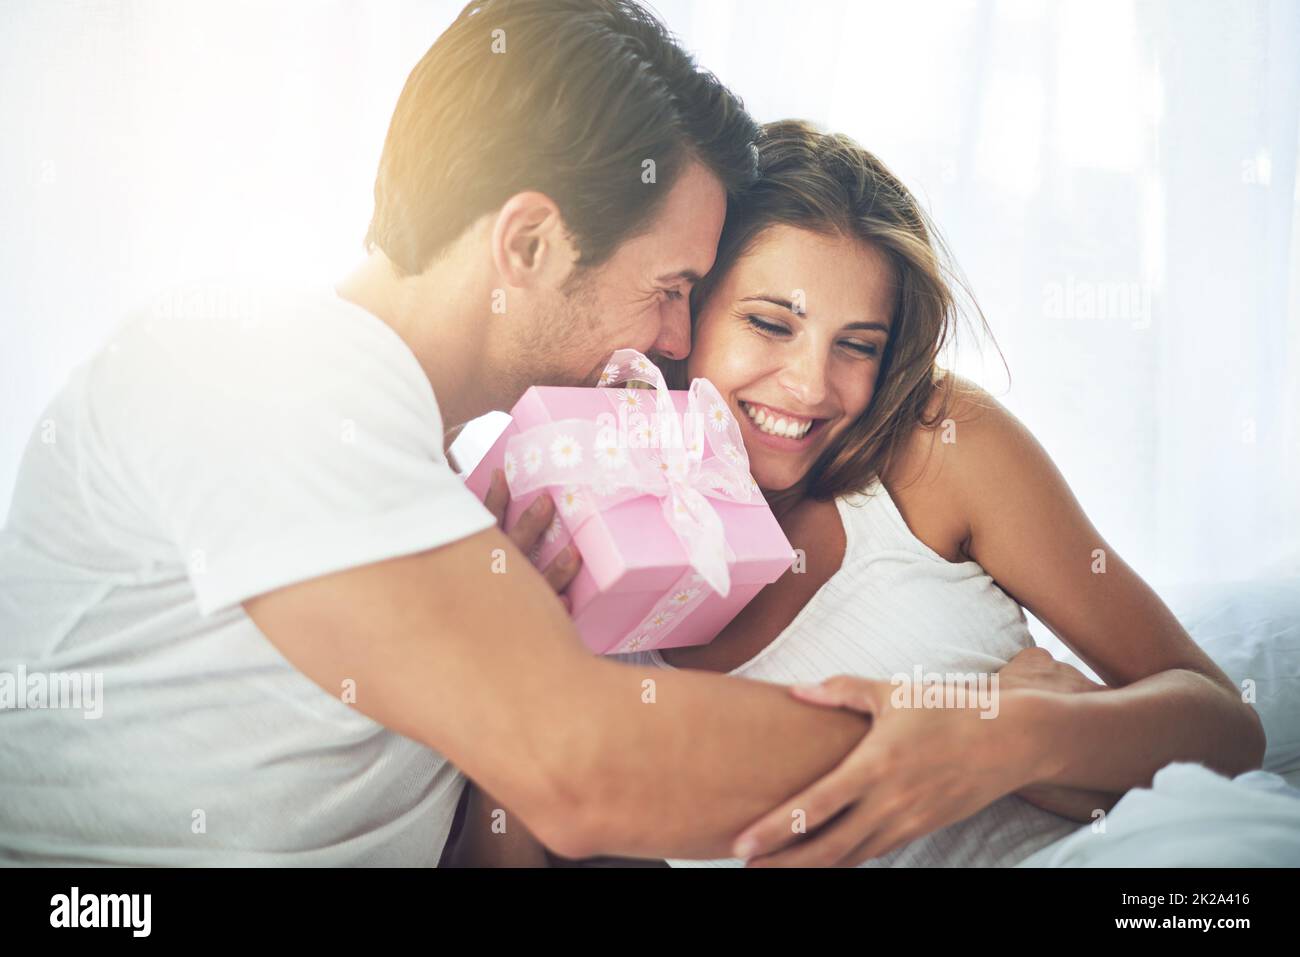 Because youre so special to me. Shot of a loving husband giving his wife a gift. Stock Photo